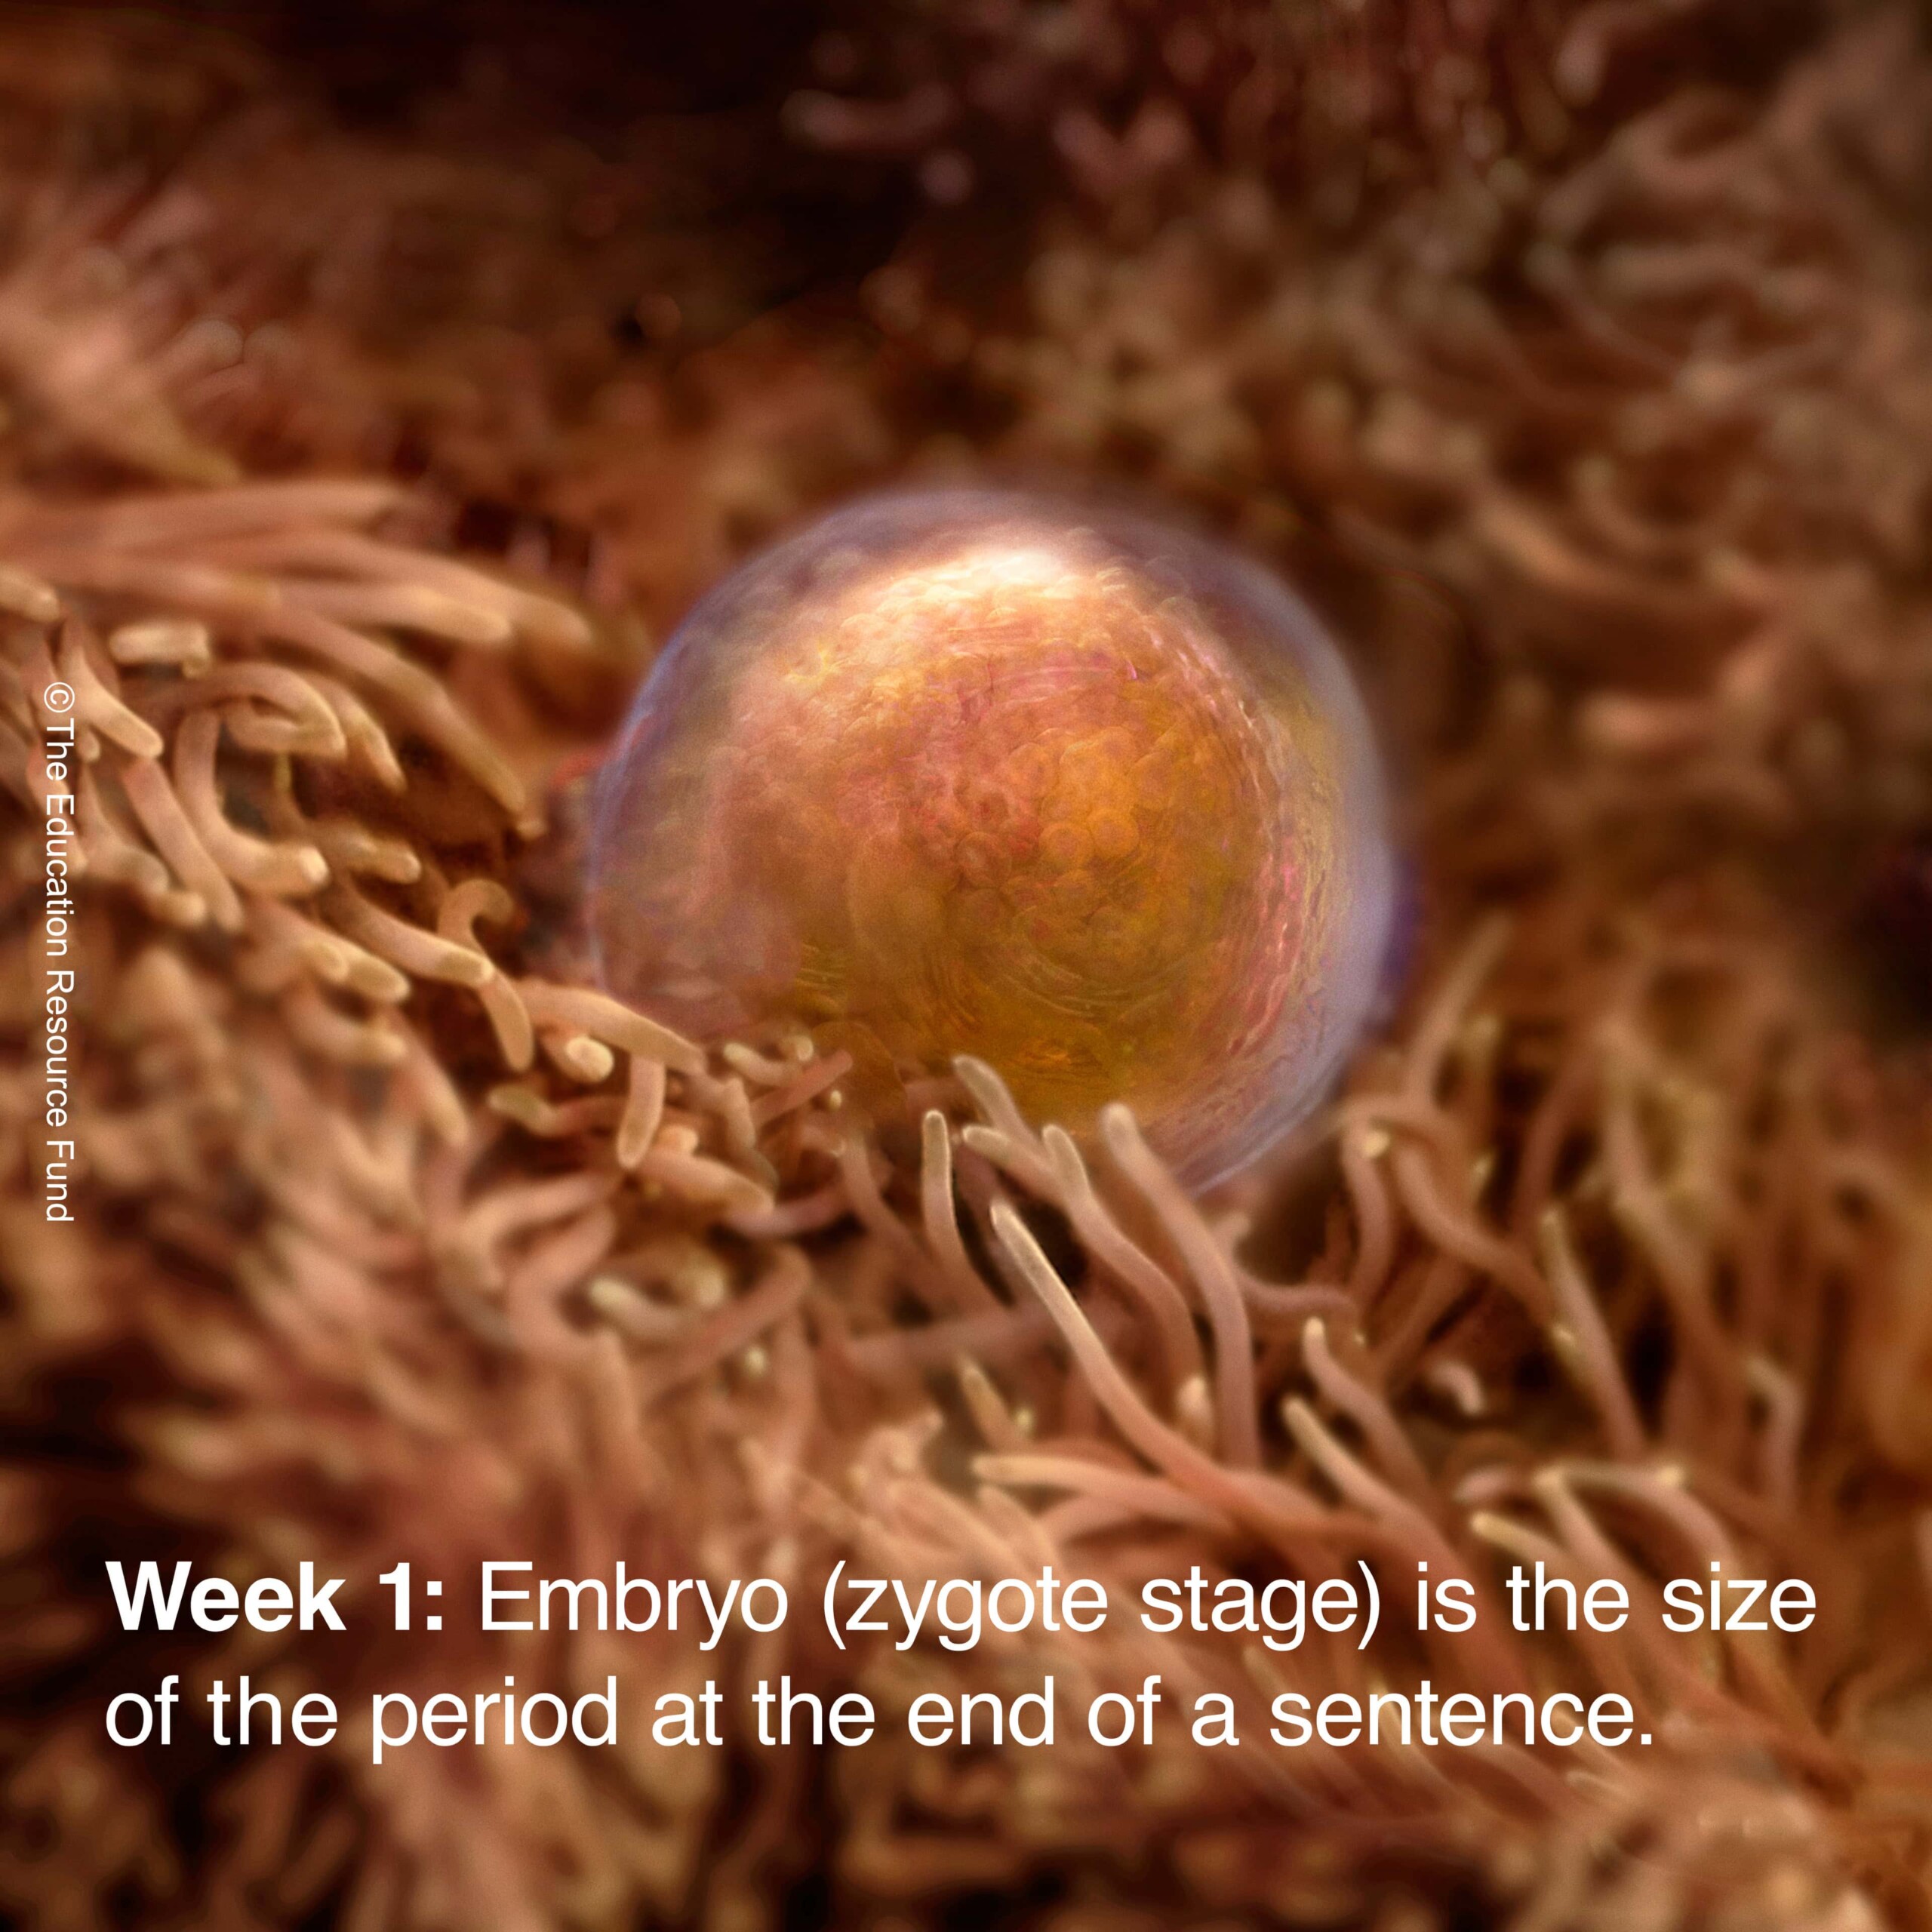 Week 1: Embryo (zygote stage) is the size of the period at the end of the sentence